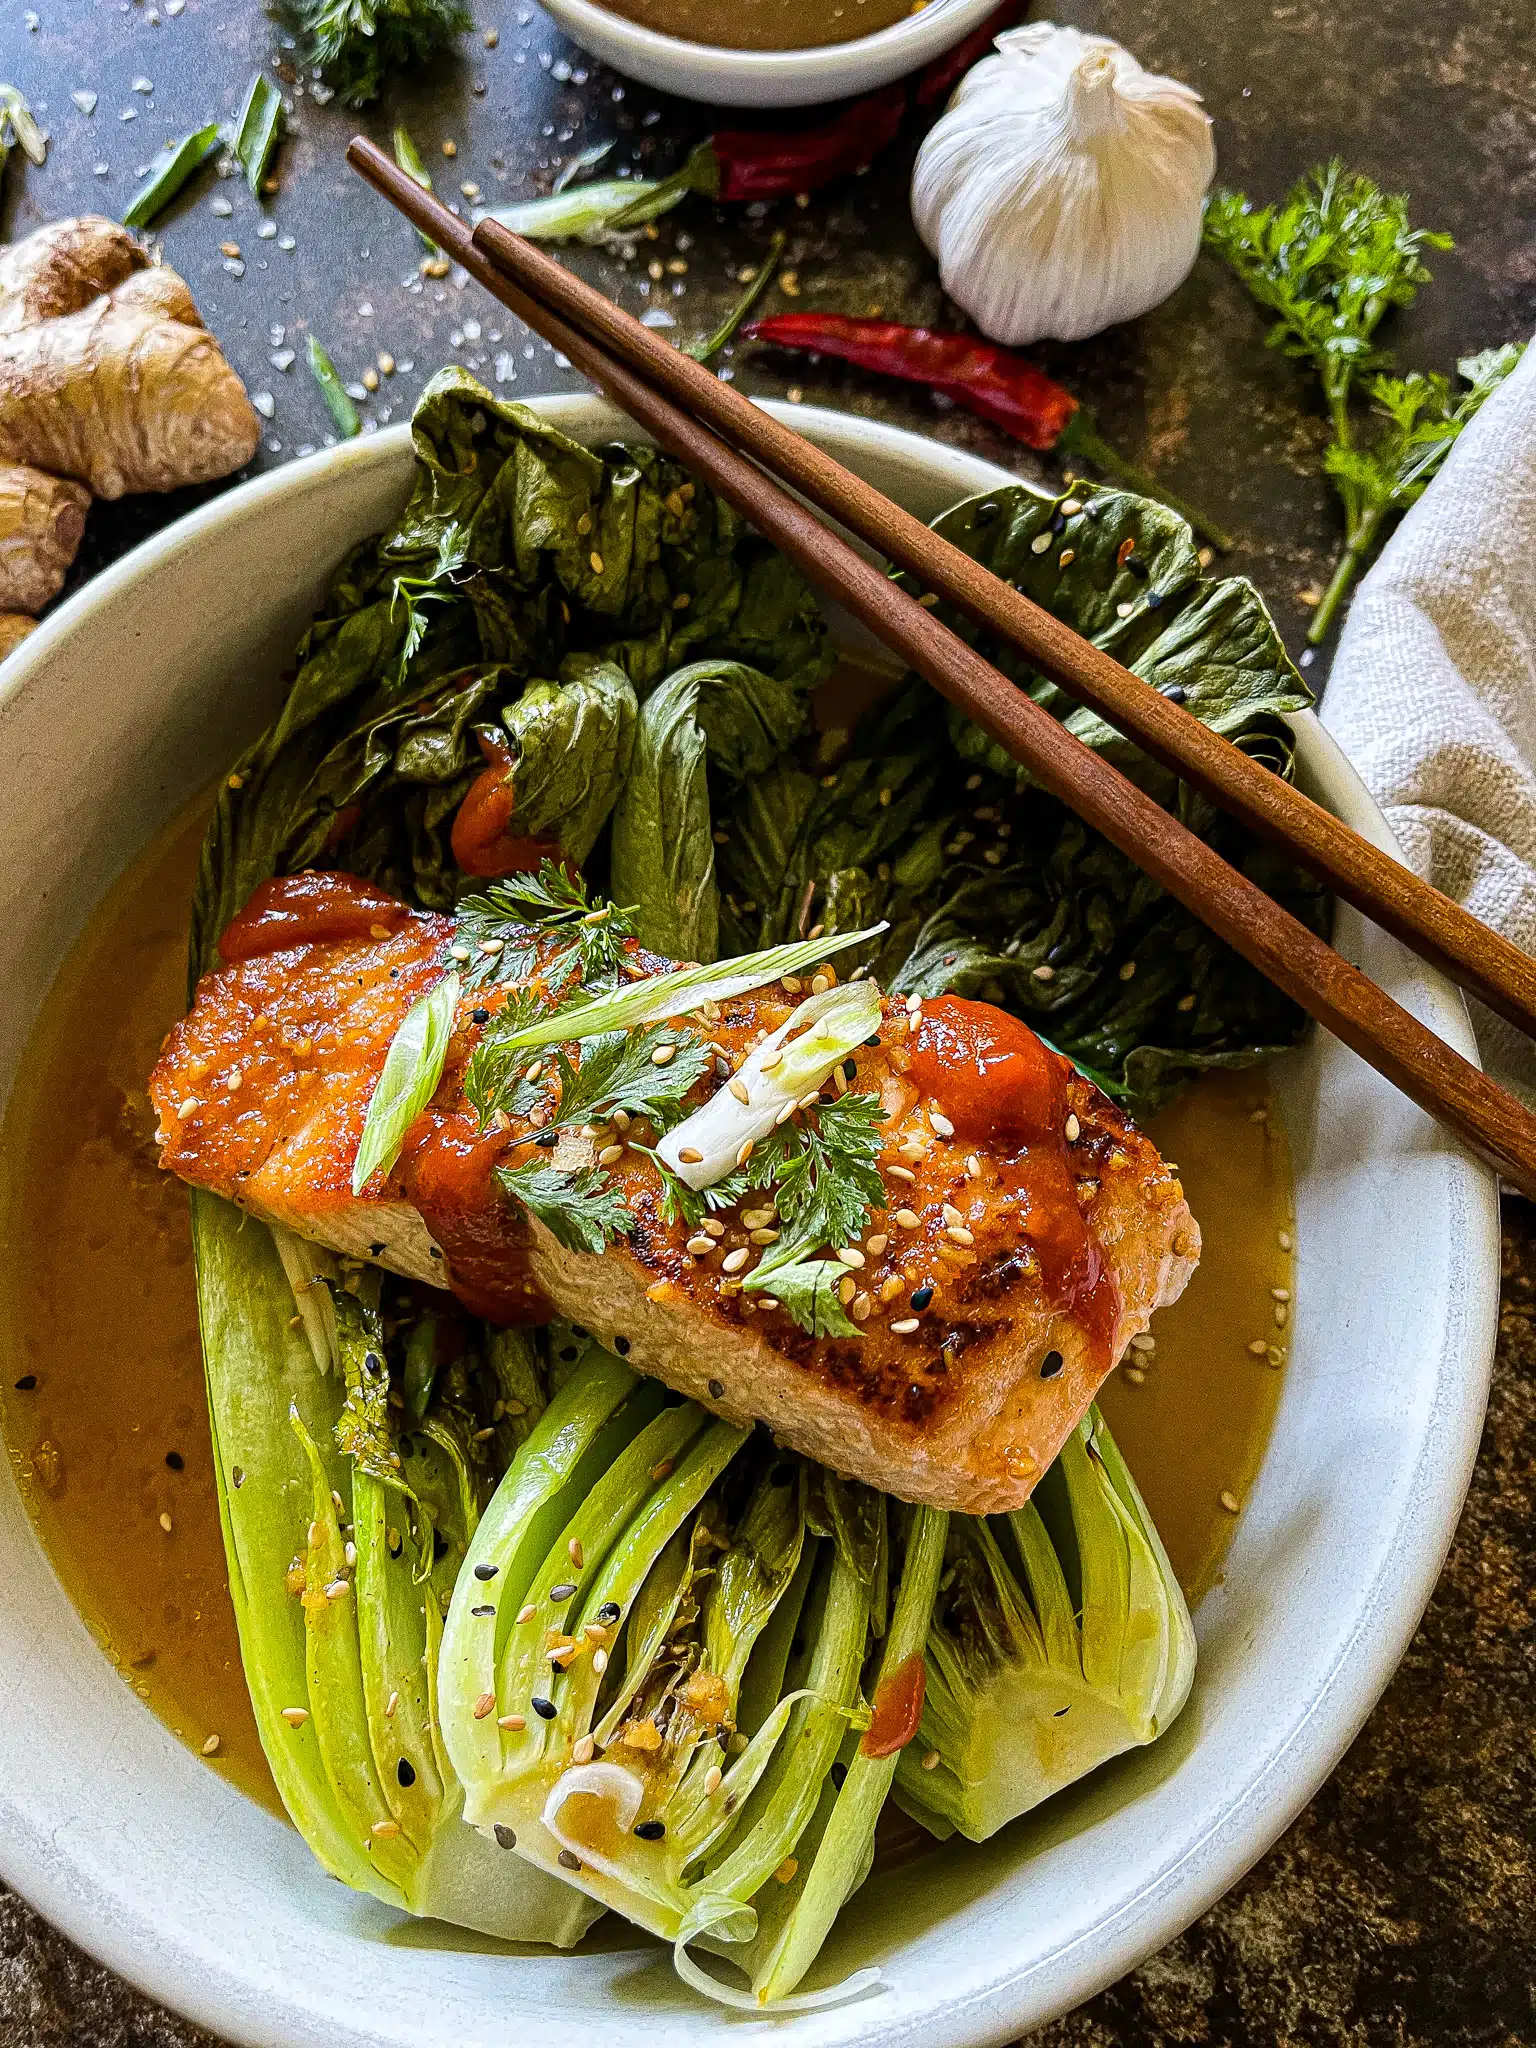 soy ginger salmon served with roasted bok choy, garnished with cilantro, green onion, and sesame seeds